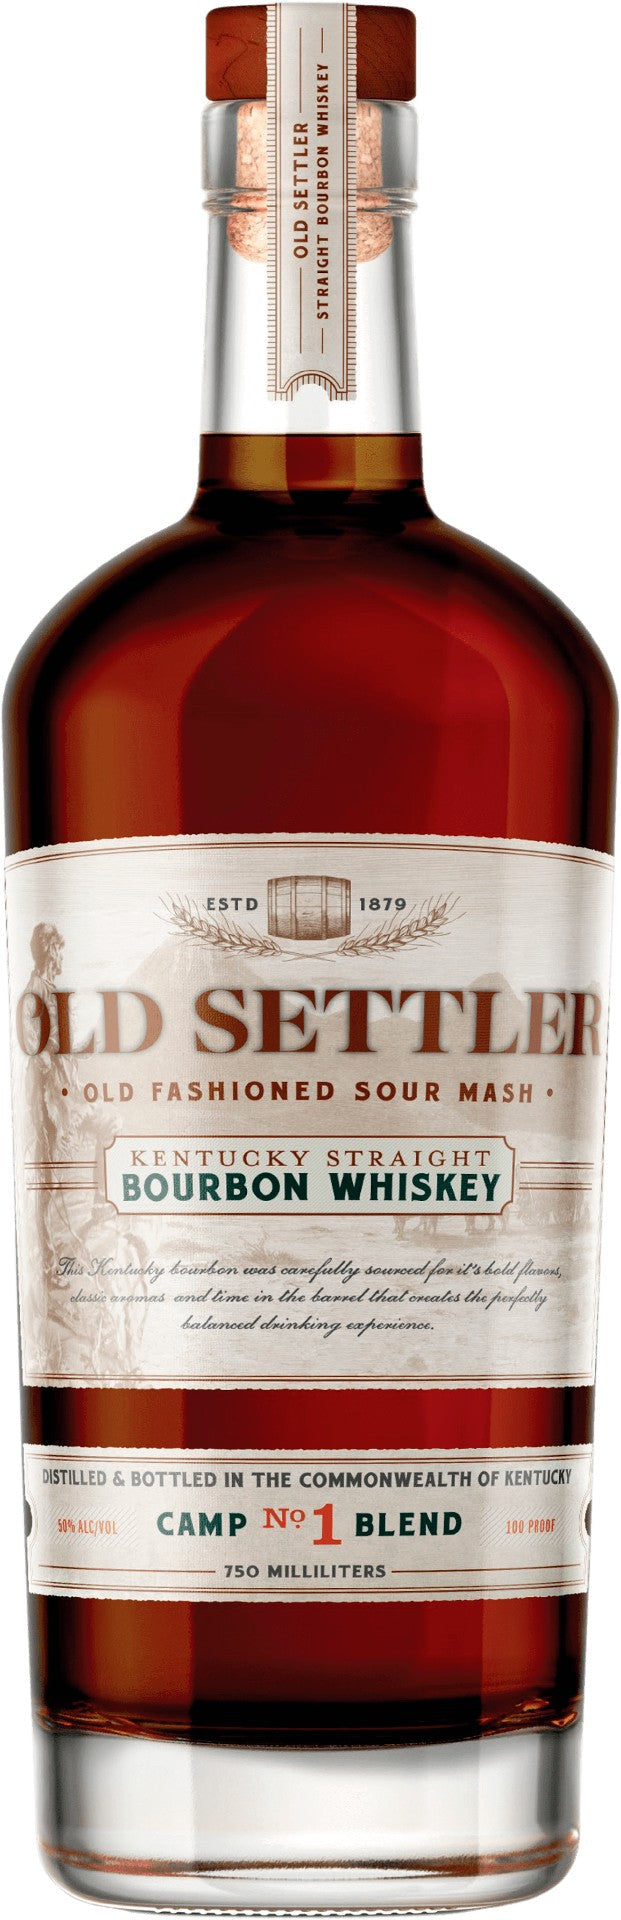 Old Settler - Old Fashioned Sour Mash Camp No. 1 Blend Kentucky Straight Bourbon Whiskey